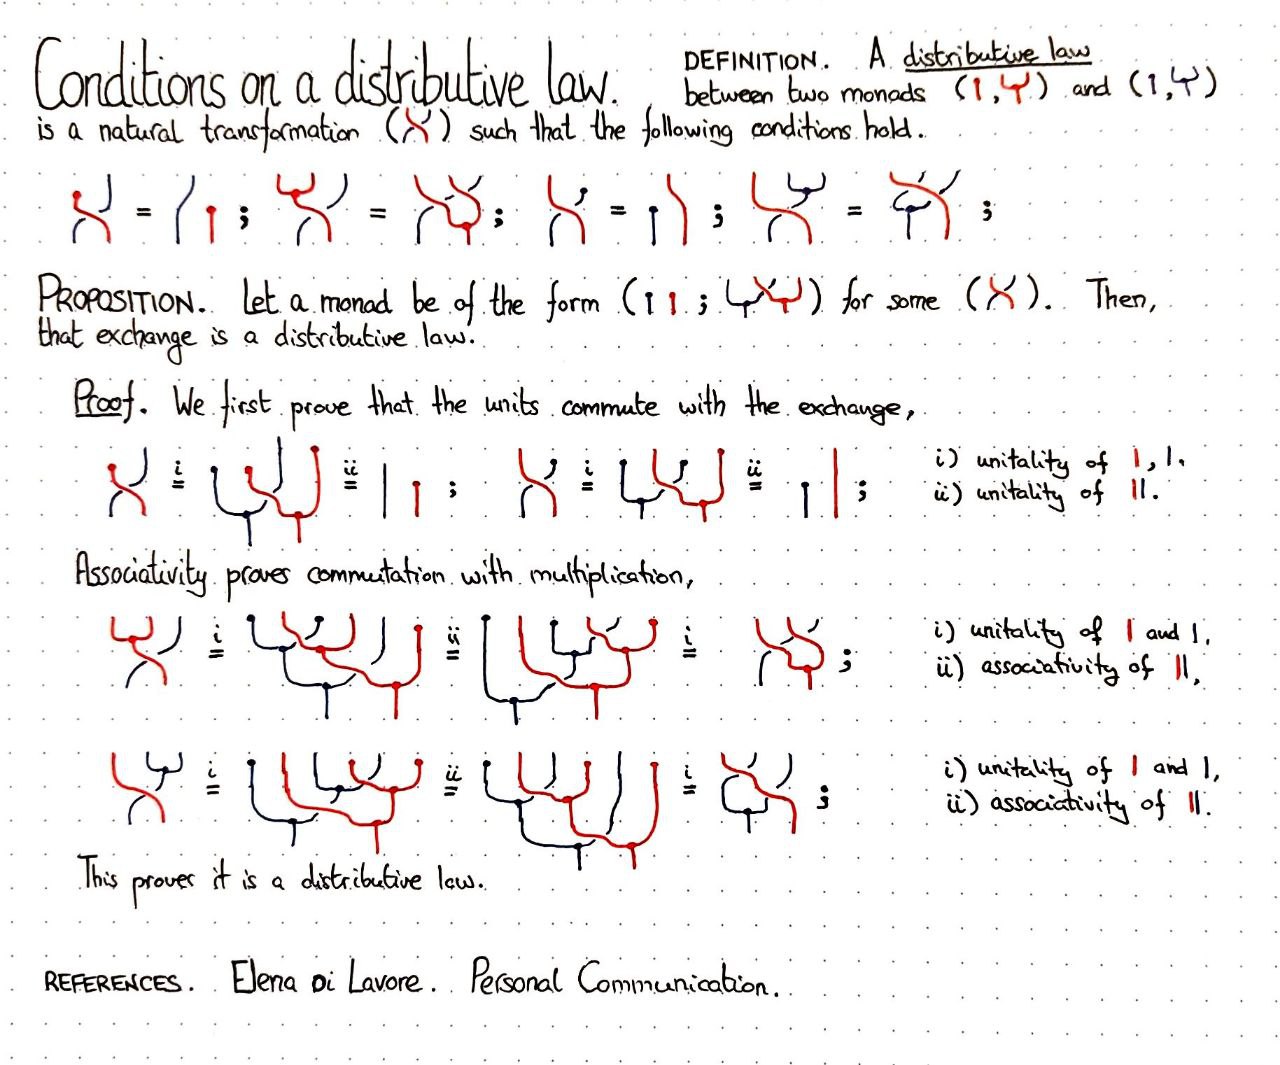 conditions-on-a-distributive-law